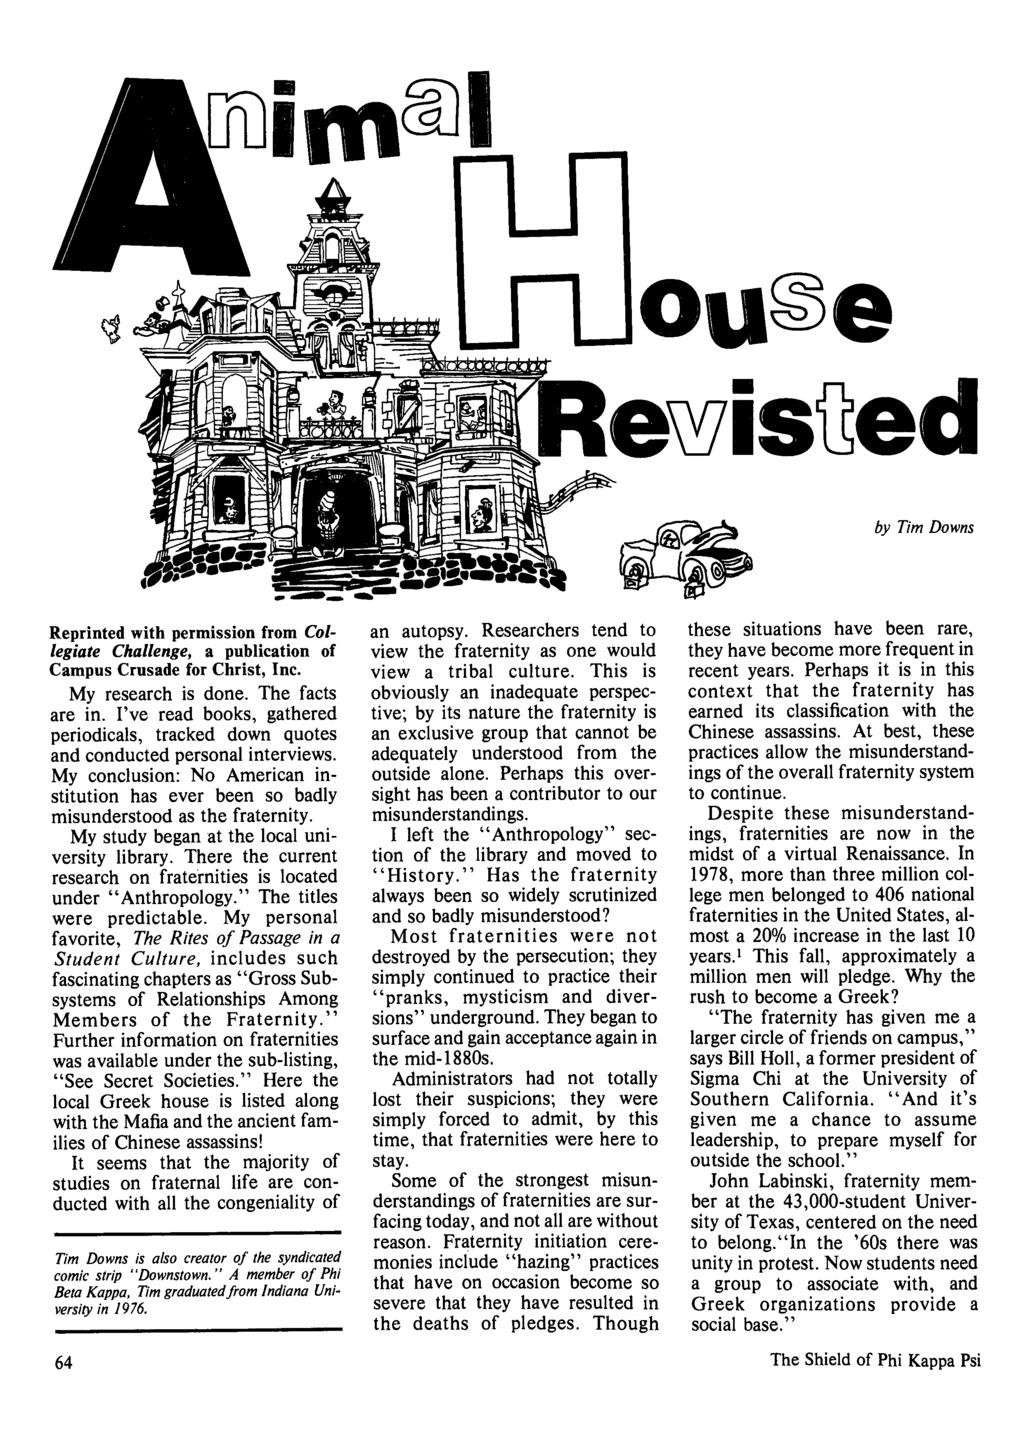 LnJou Rewist^ed by Tim Downs Reprinted with permission from Collegiate Challenge, a publication of Campus Crusade for Christ, Inc. My research is done. The facts are in.